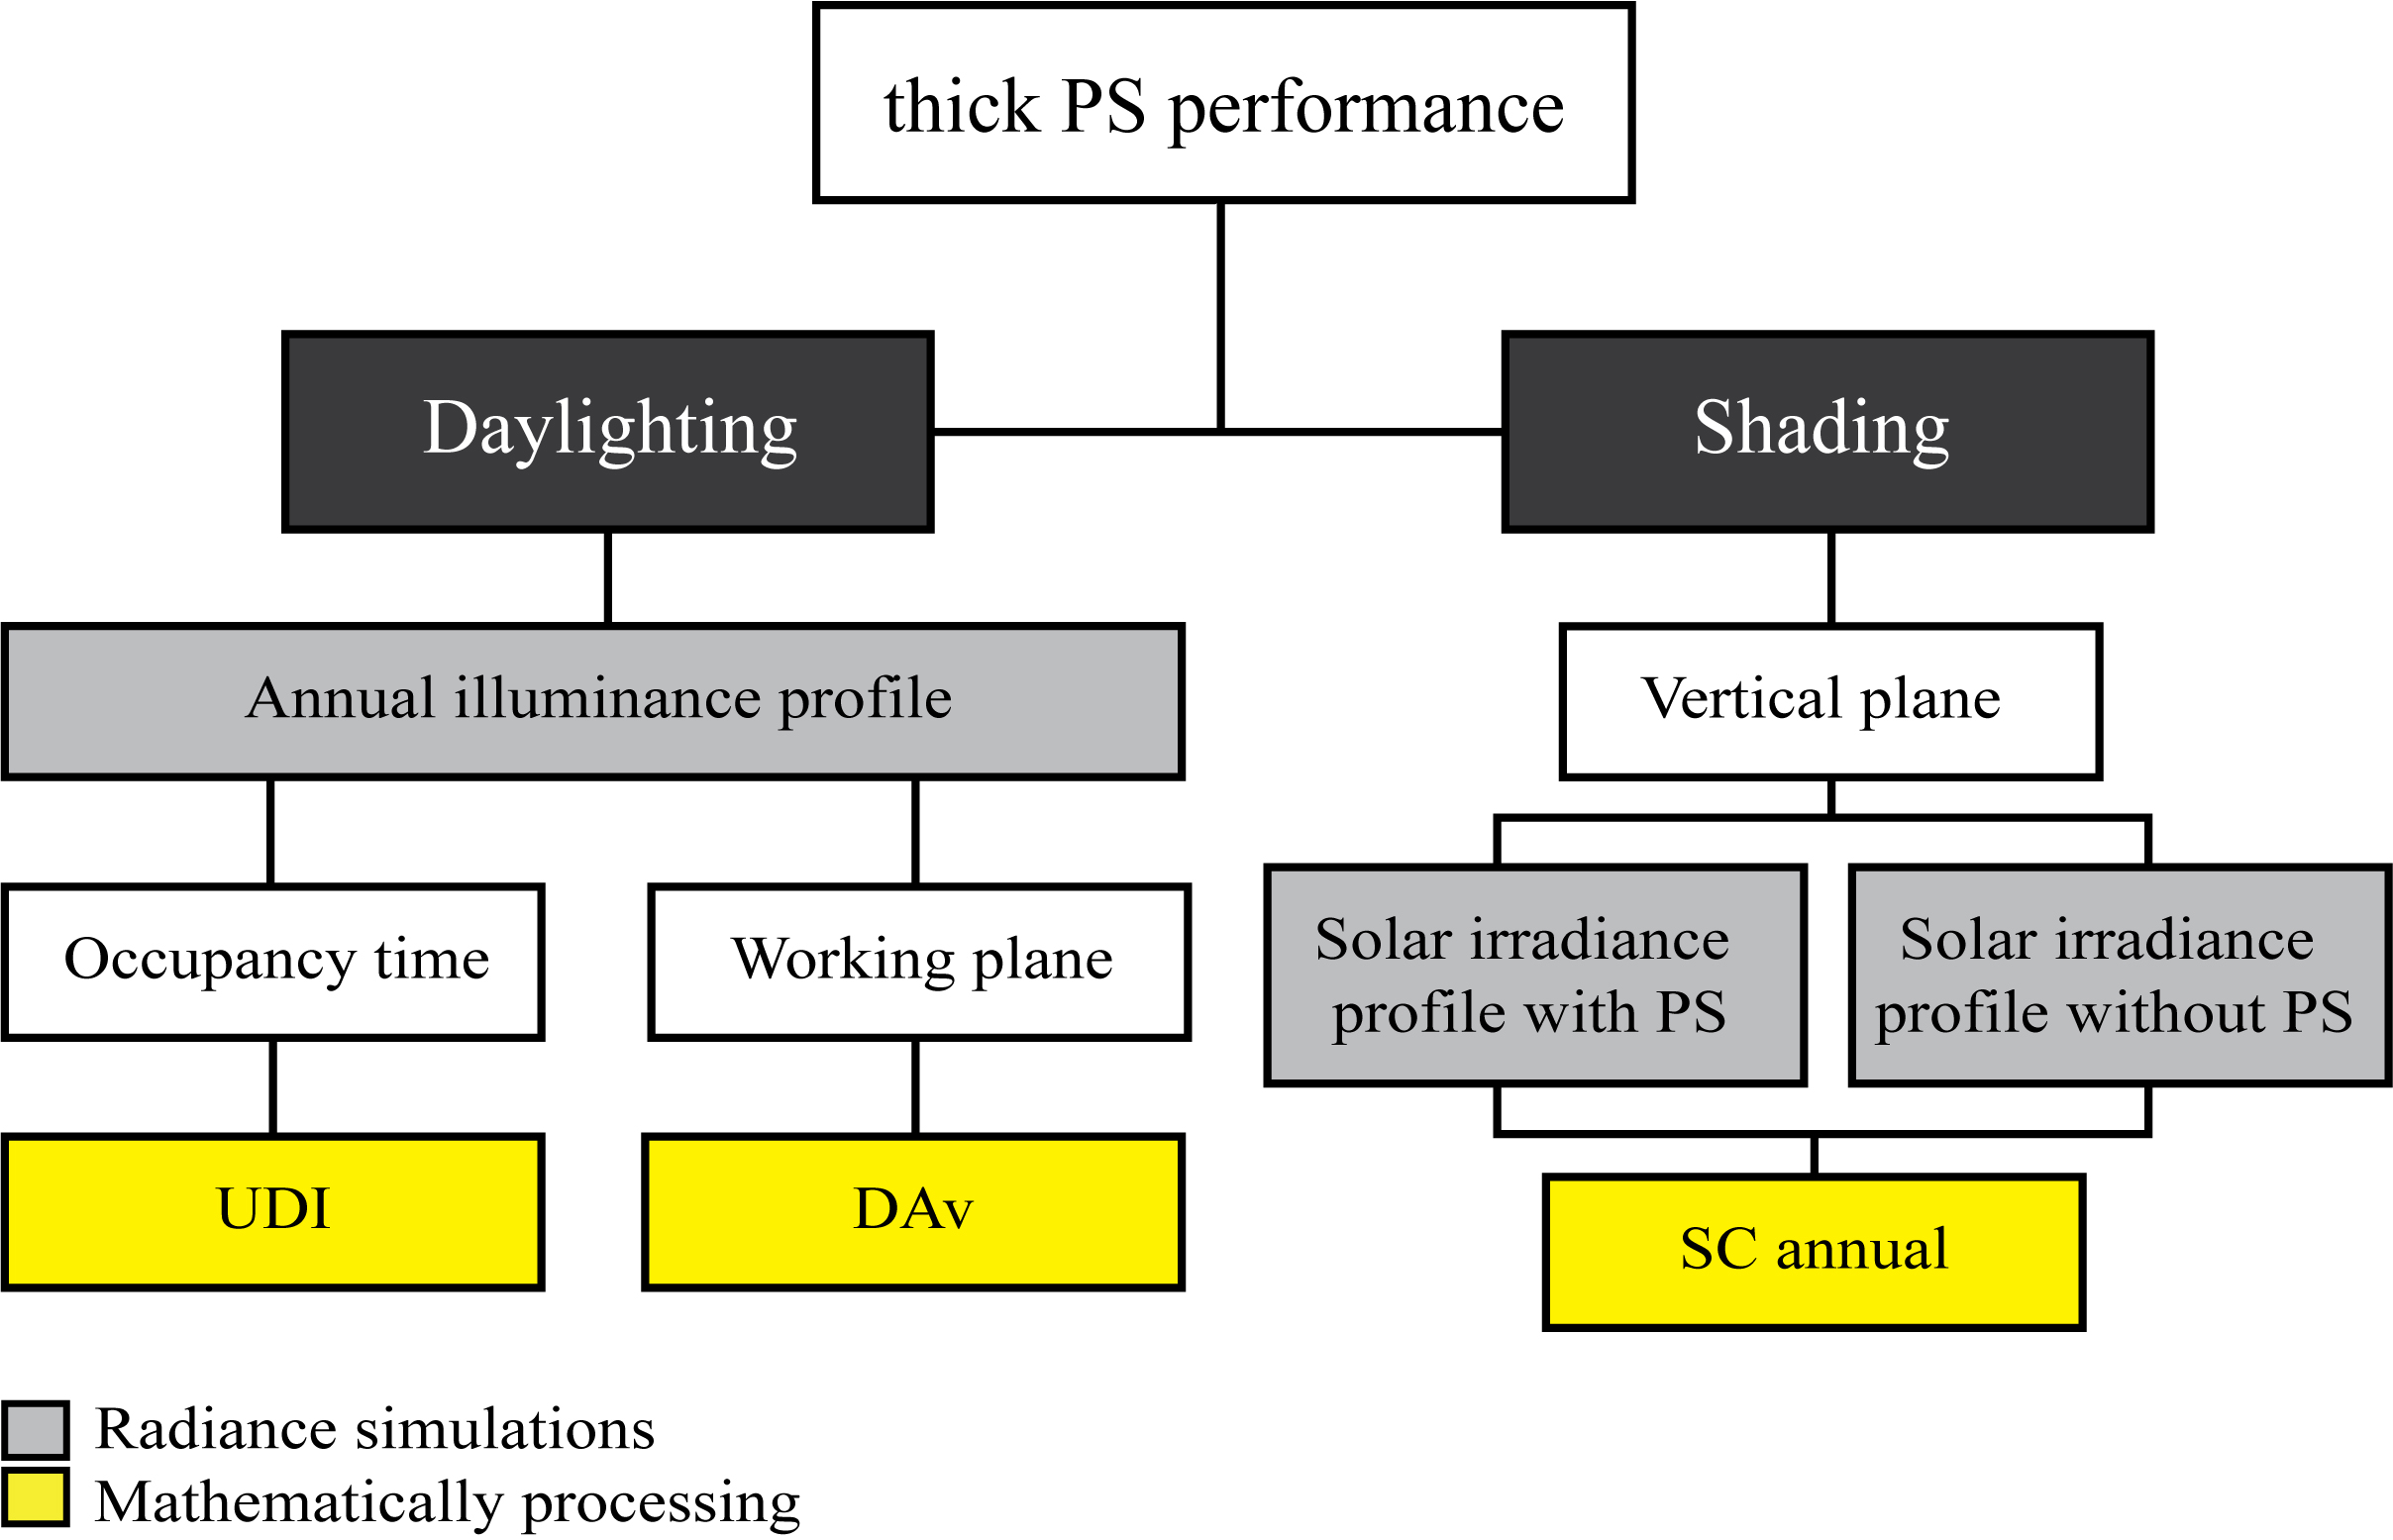 Workflow for predicting the daylighting and shading performance of thick PS.